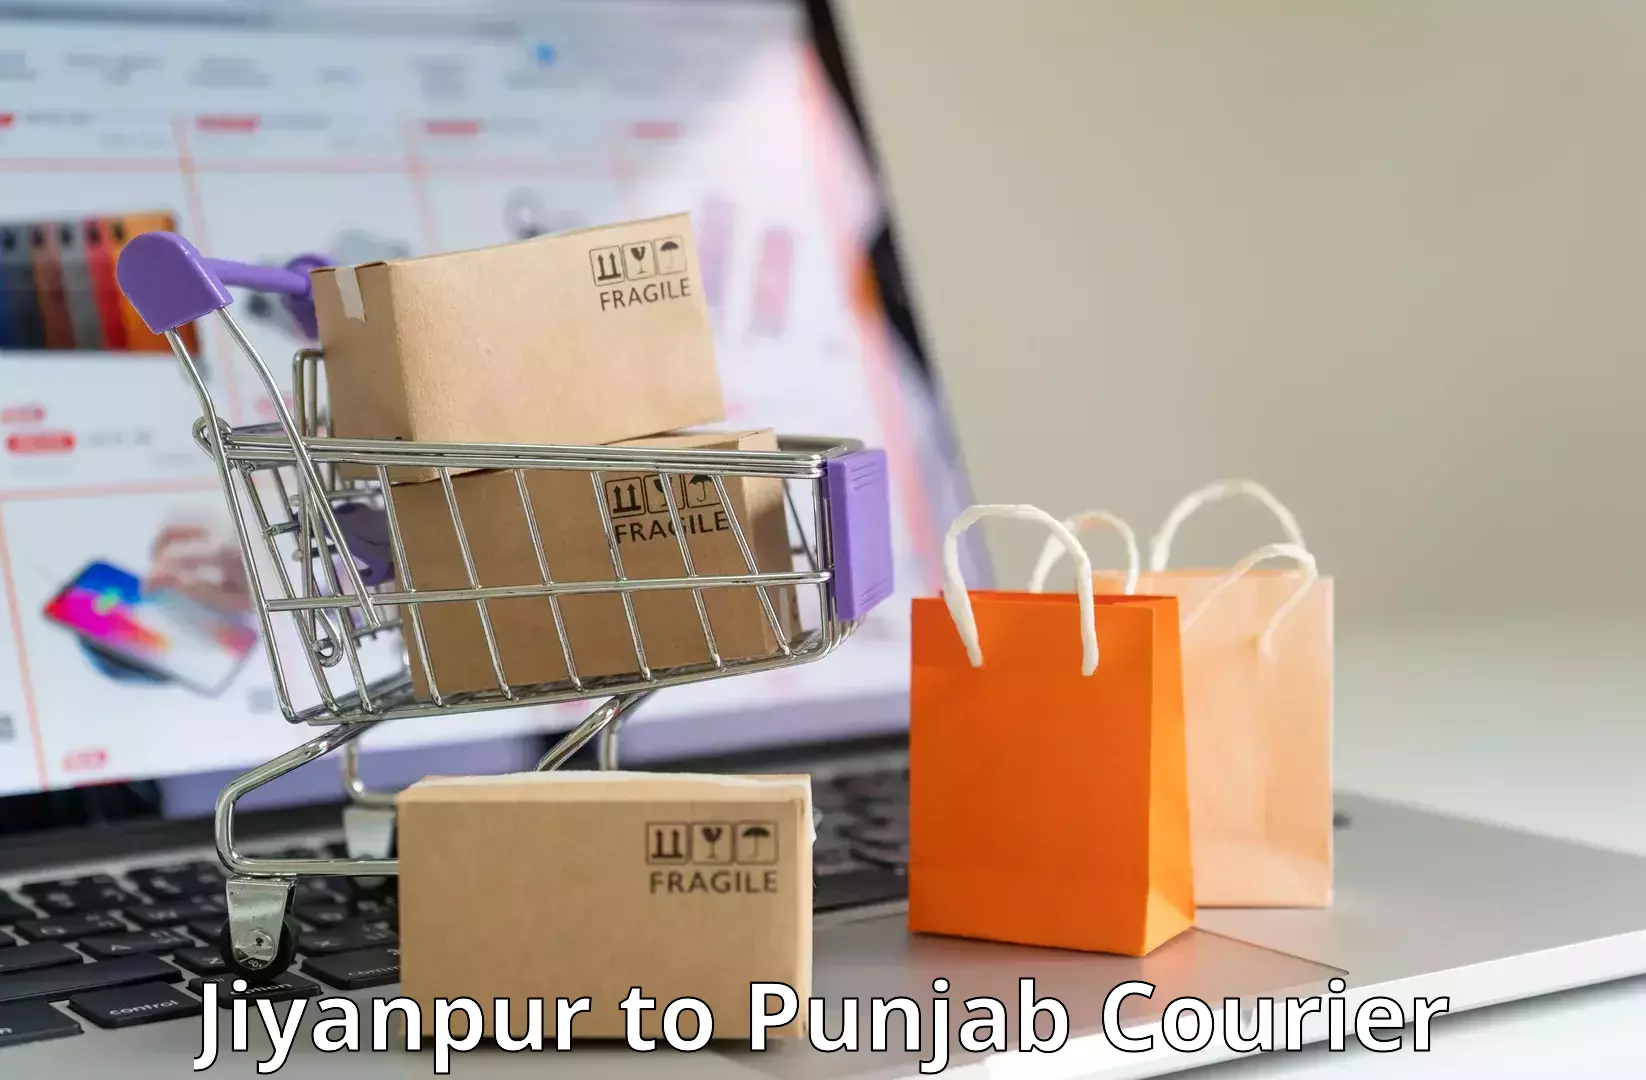 Quality courier partnerships Jiyanpur to Khanna